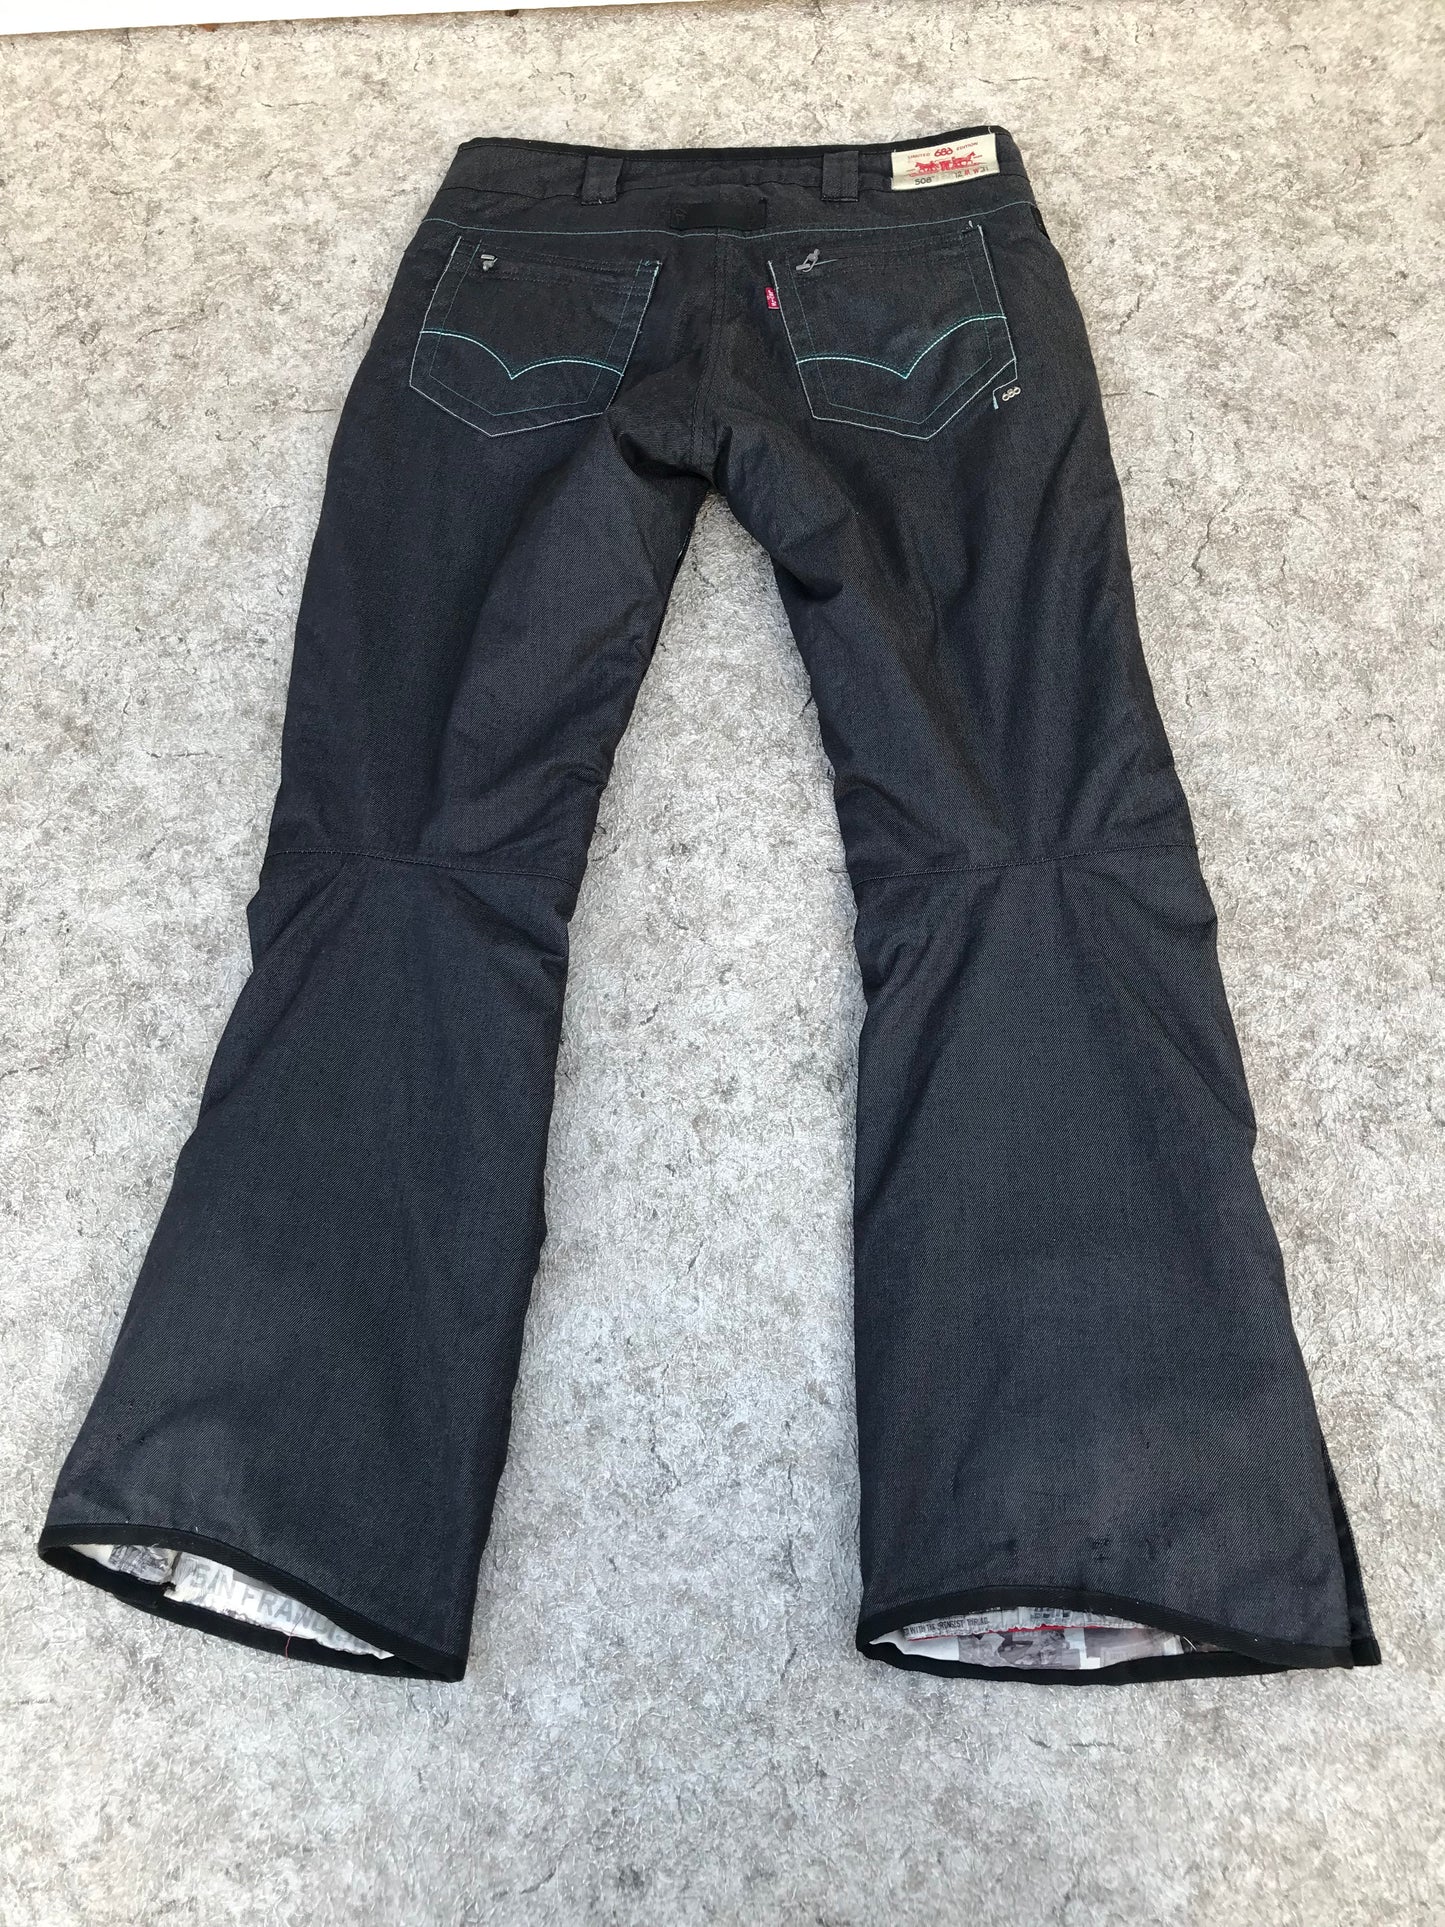 Snow Pants Ladies Size Large Levies 686 Denim Style Snowboarding Outstanding New Demo Model